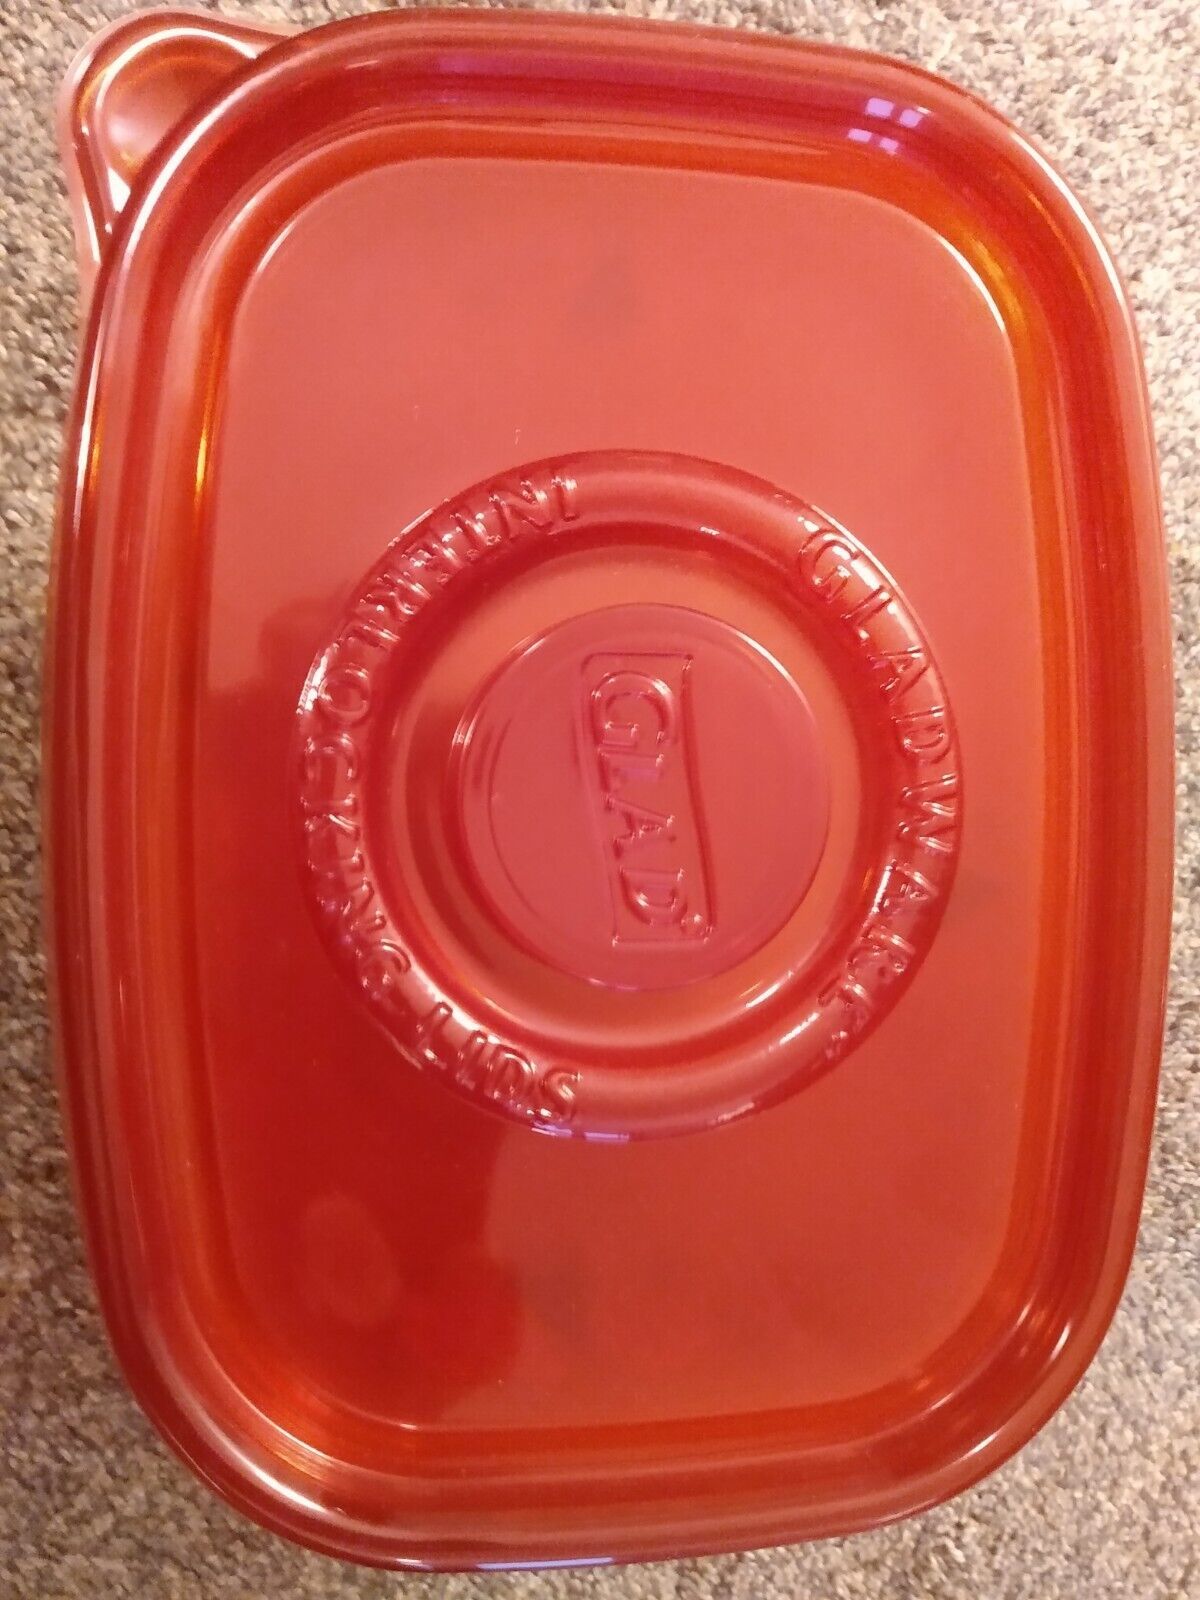 Glad Holiday Deep Dish Food Storage Containers, Large, 3 ct